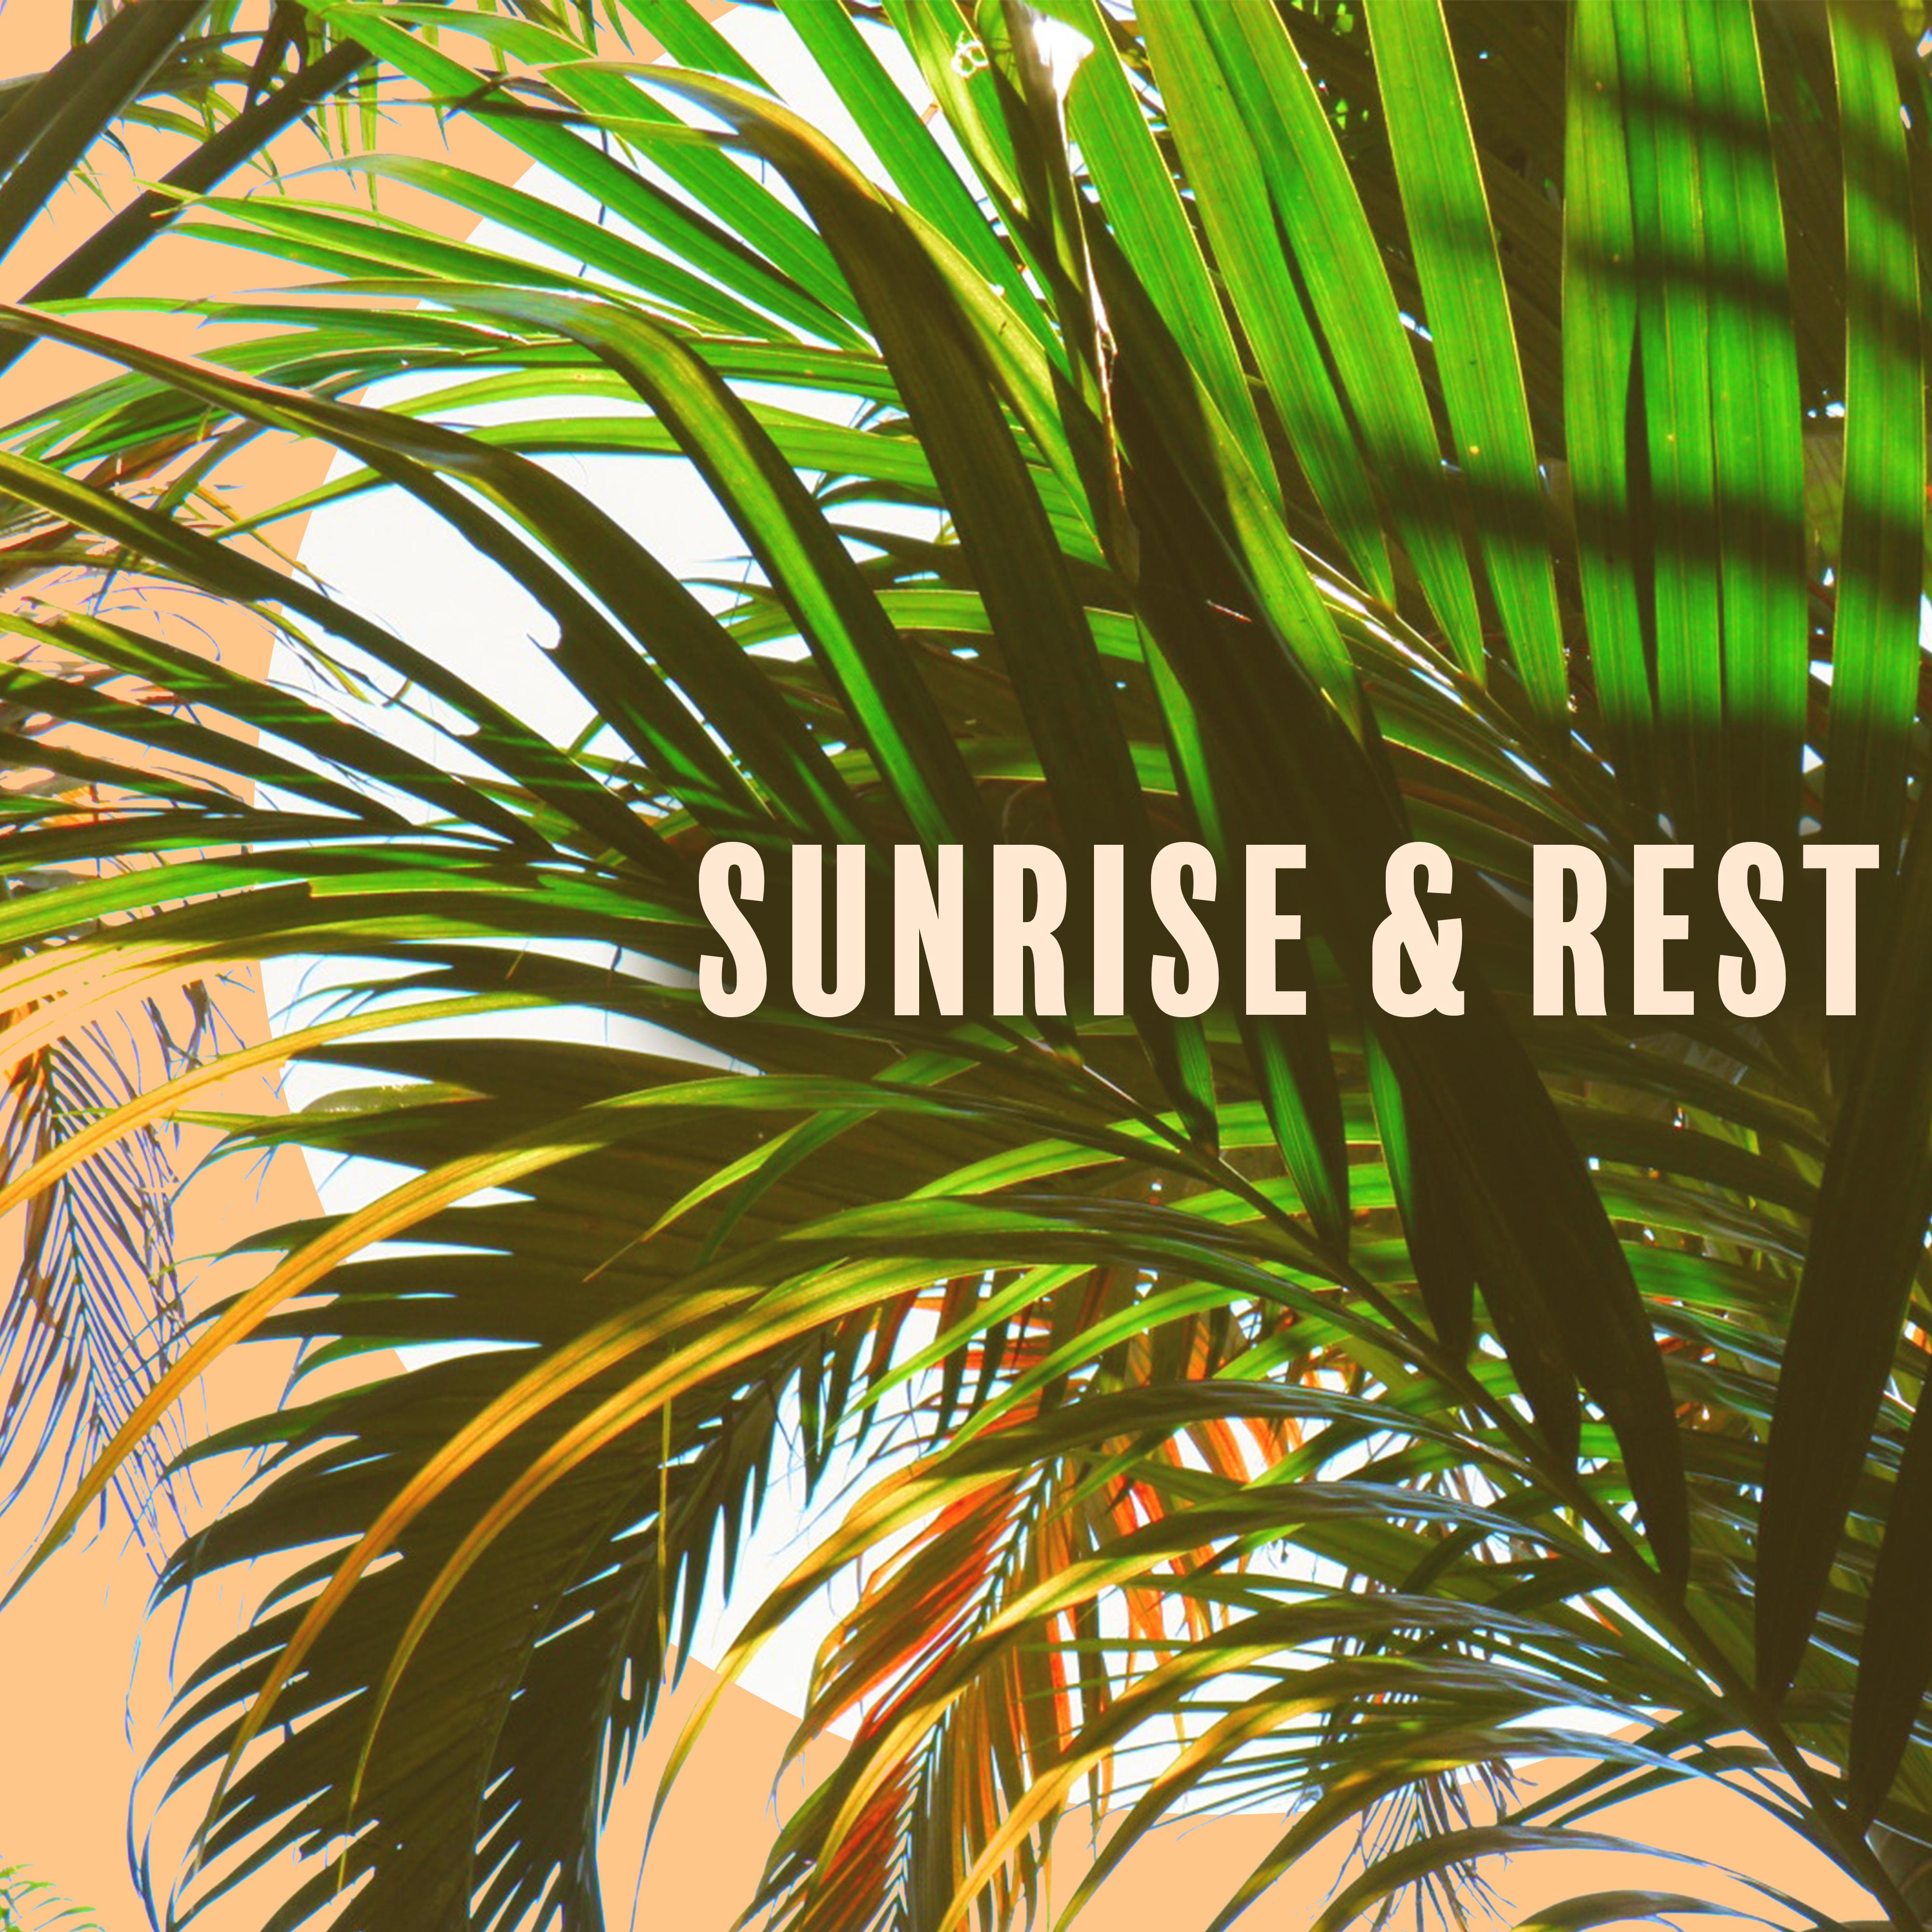 Sunrise  Rest  Chillout Music, Pure Waves, Relaxation Day, Calm Sounds, Total Relaxation